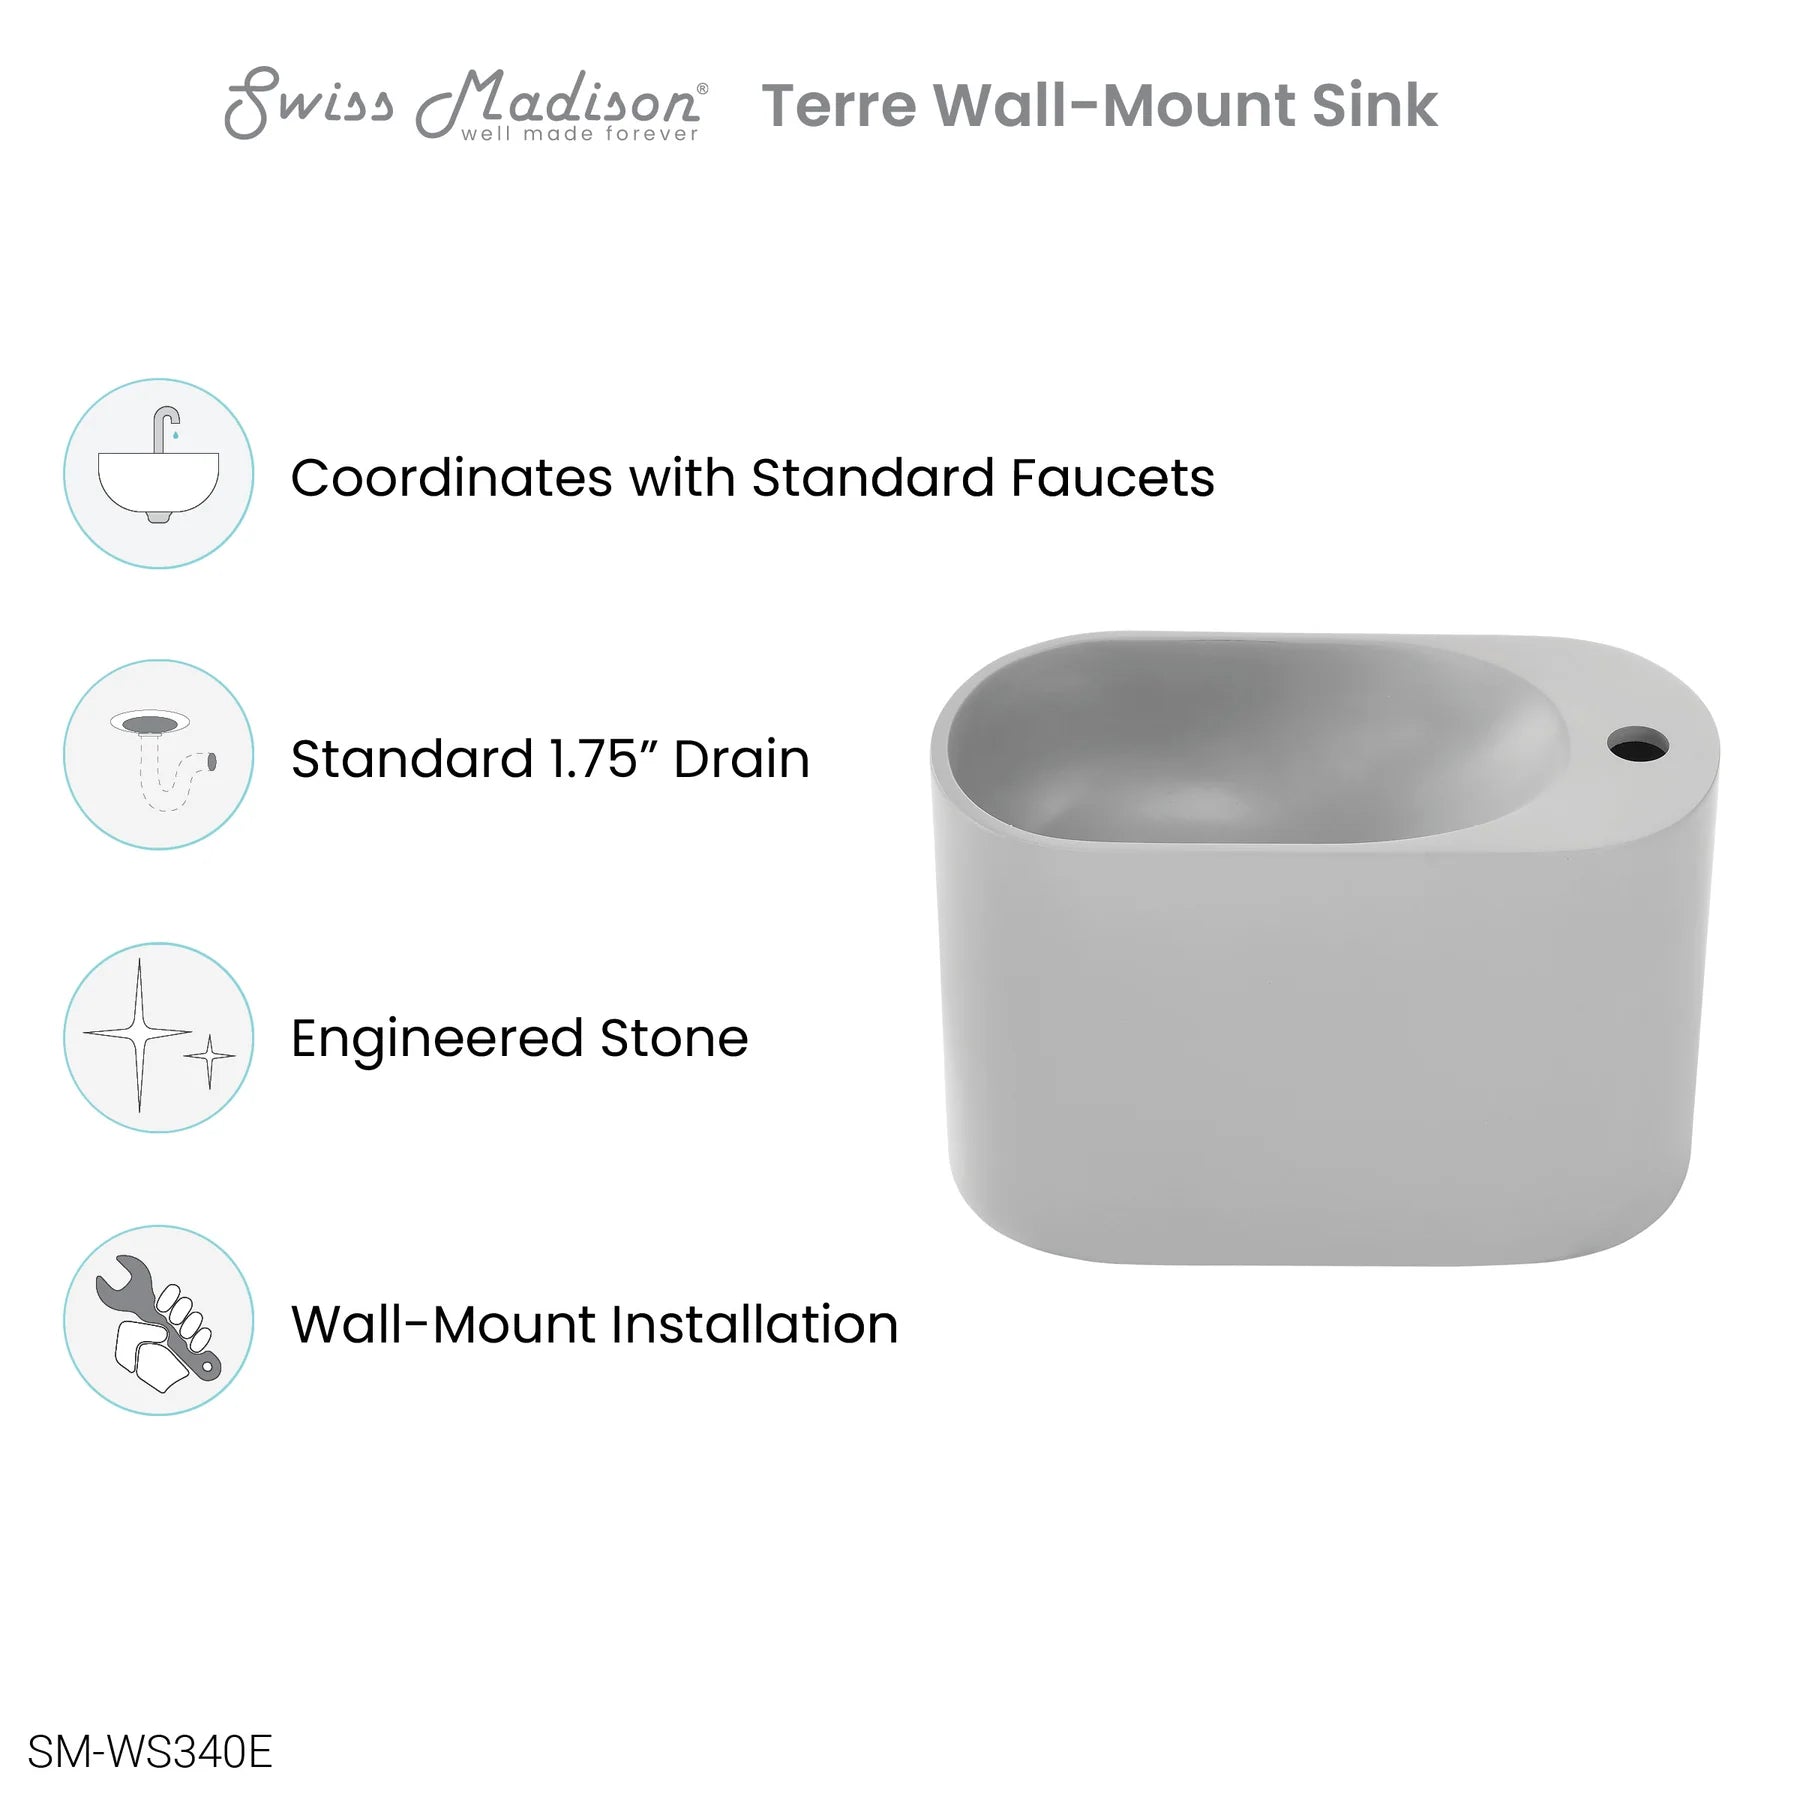 Swiss Madison Terre 17.5" Right Side Faucet Wall-Mount Bathroom Sink in Pashmina Grey - SM-WS340E